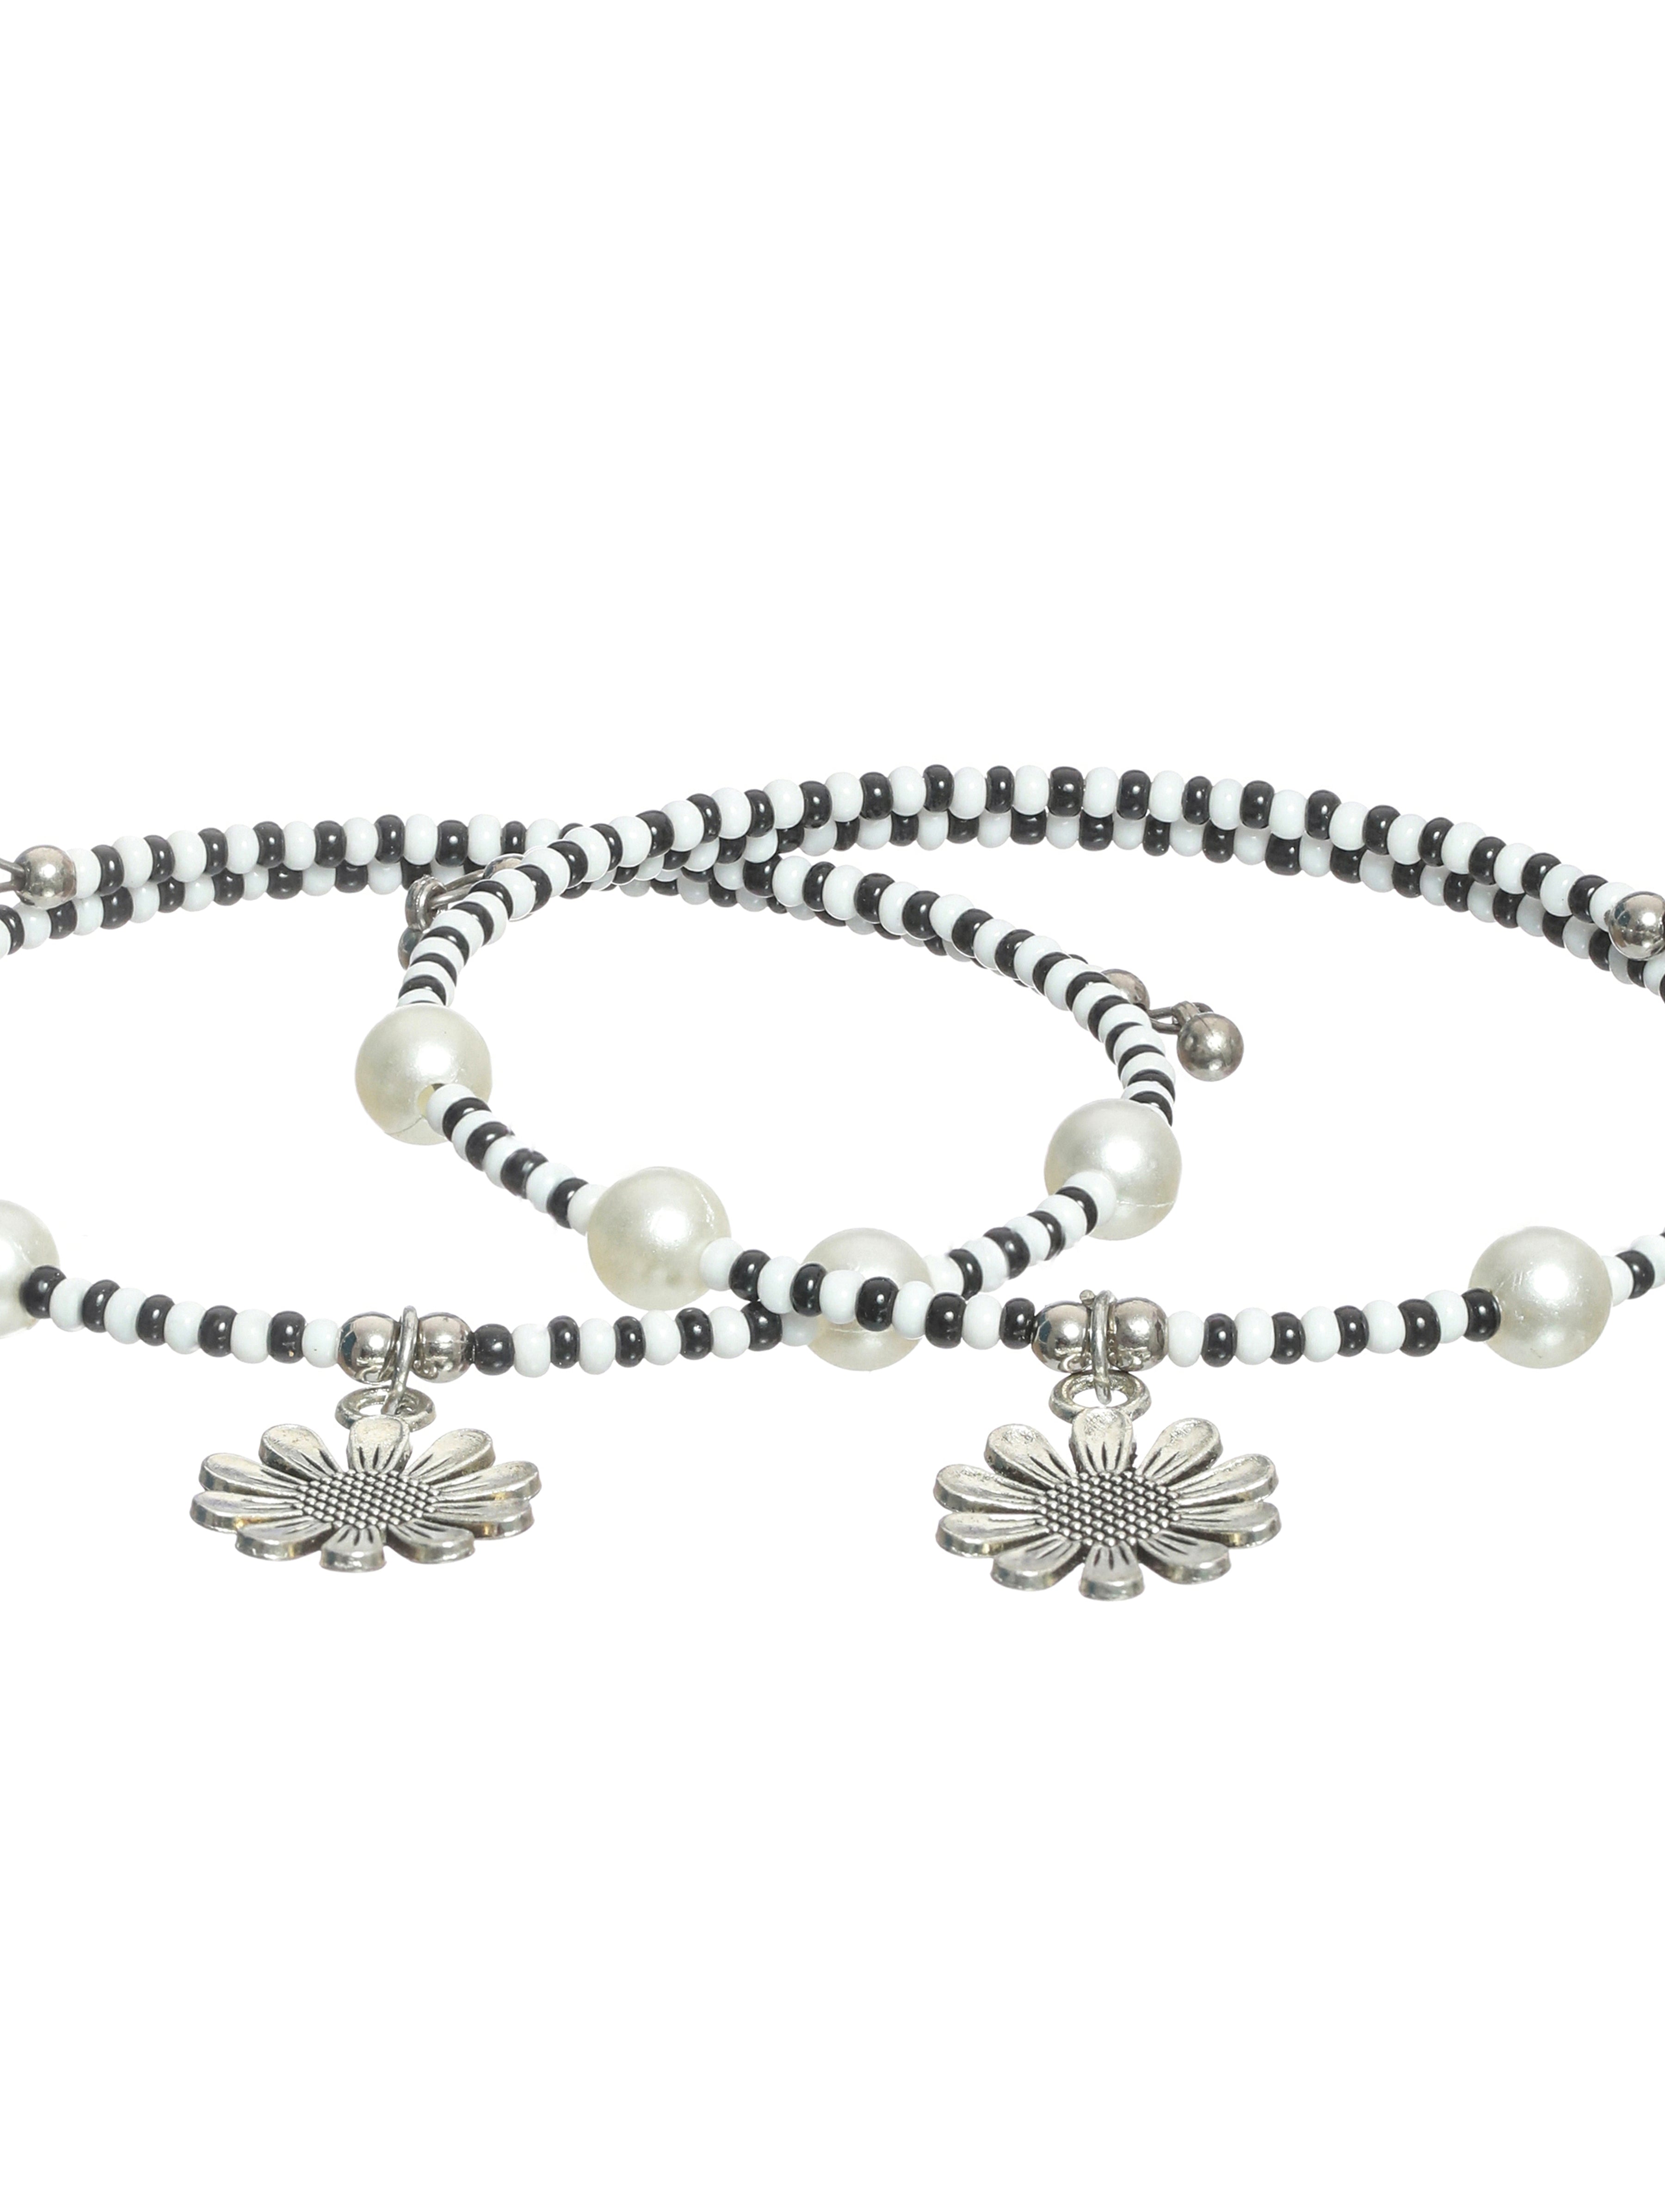 Set of 2 Silver-Toned & Black & White Beaded Handcrafted Anklets